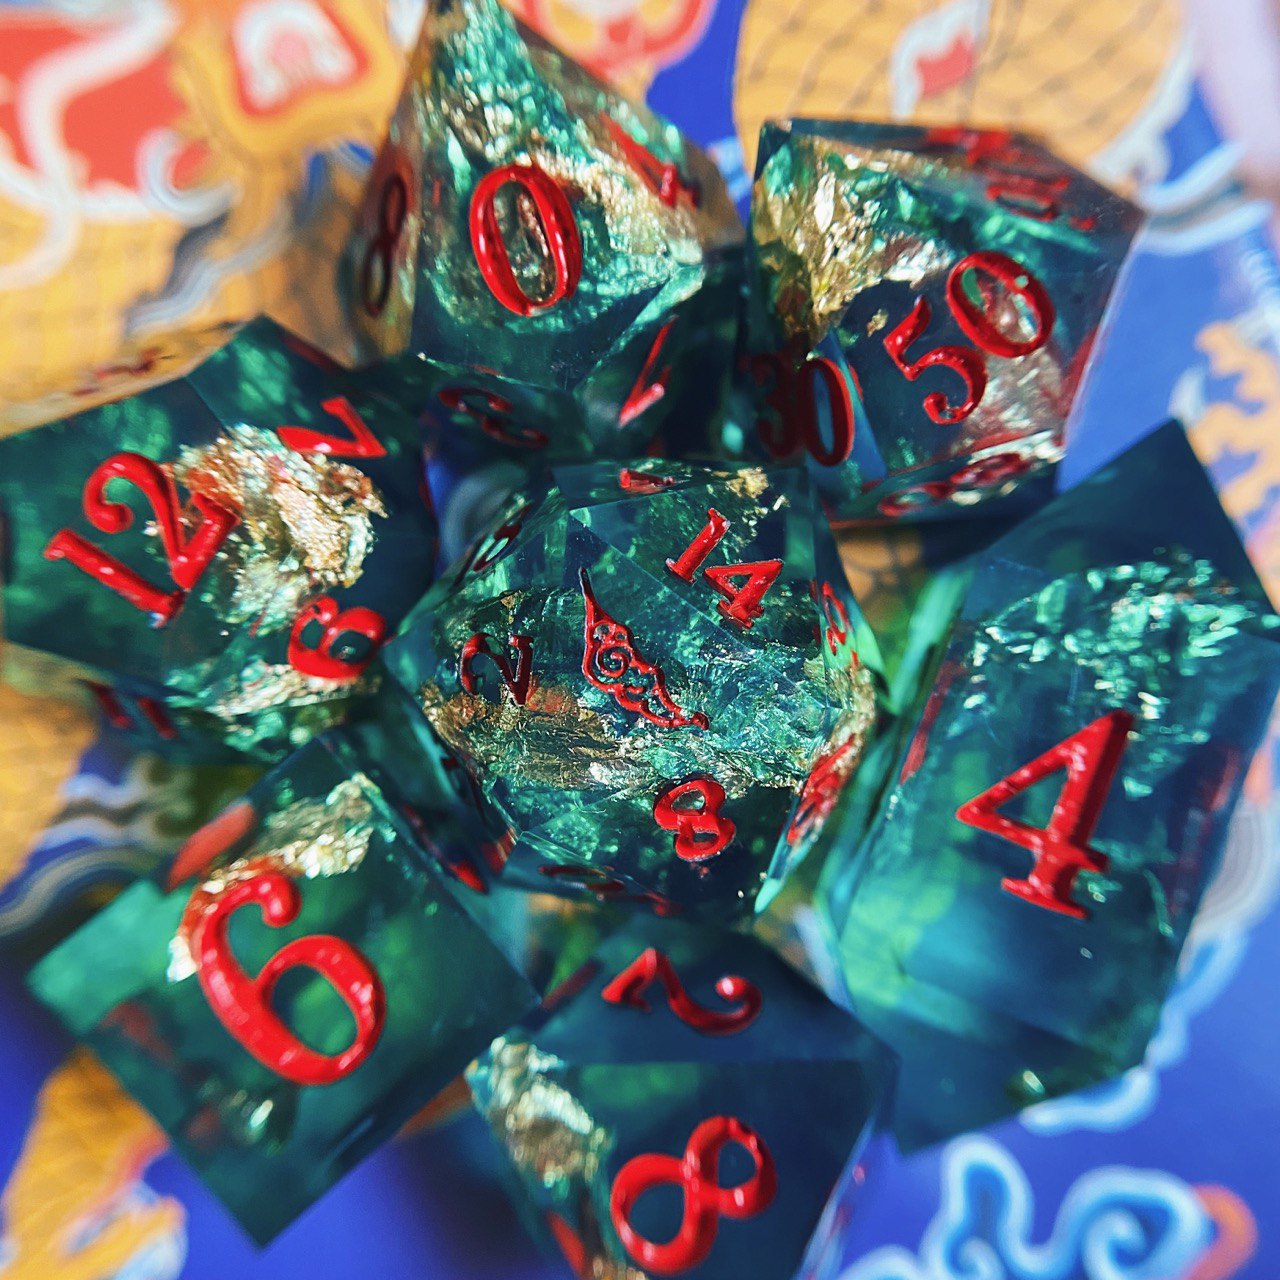 d&d dice set handmade by sambal & mages, inspired by a chinese warrior, green resin with gold foil, inked in red